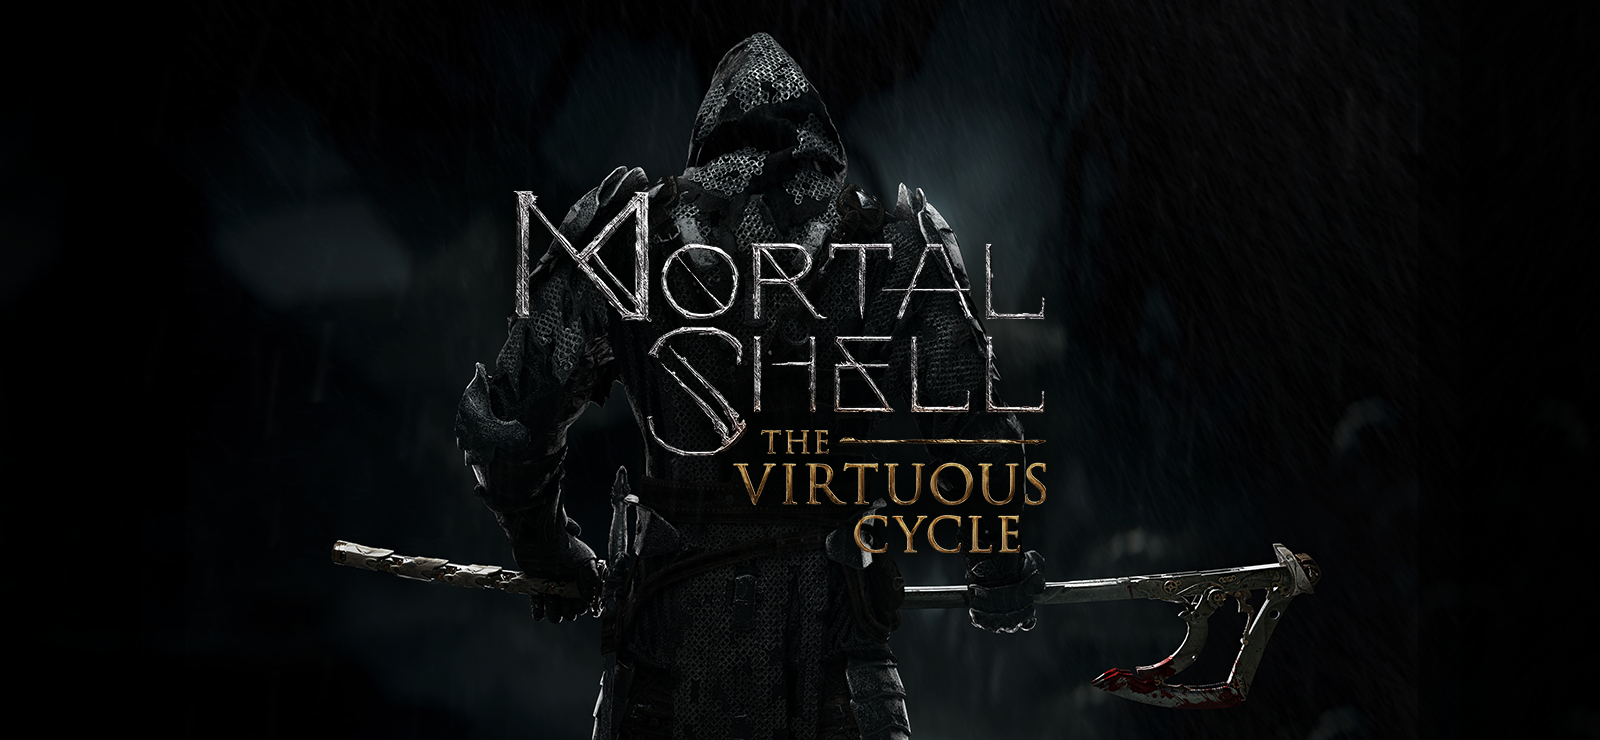 Mortal Shell - The Virtuous Cycle